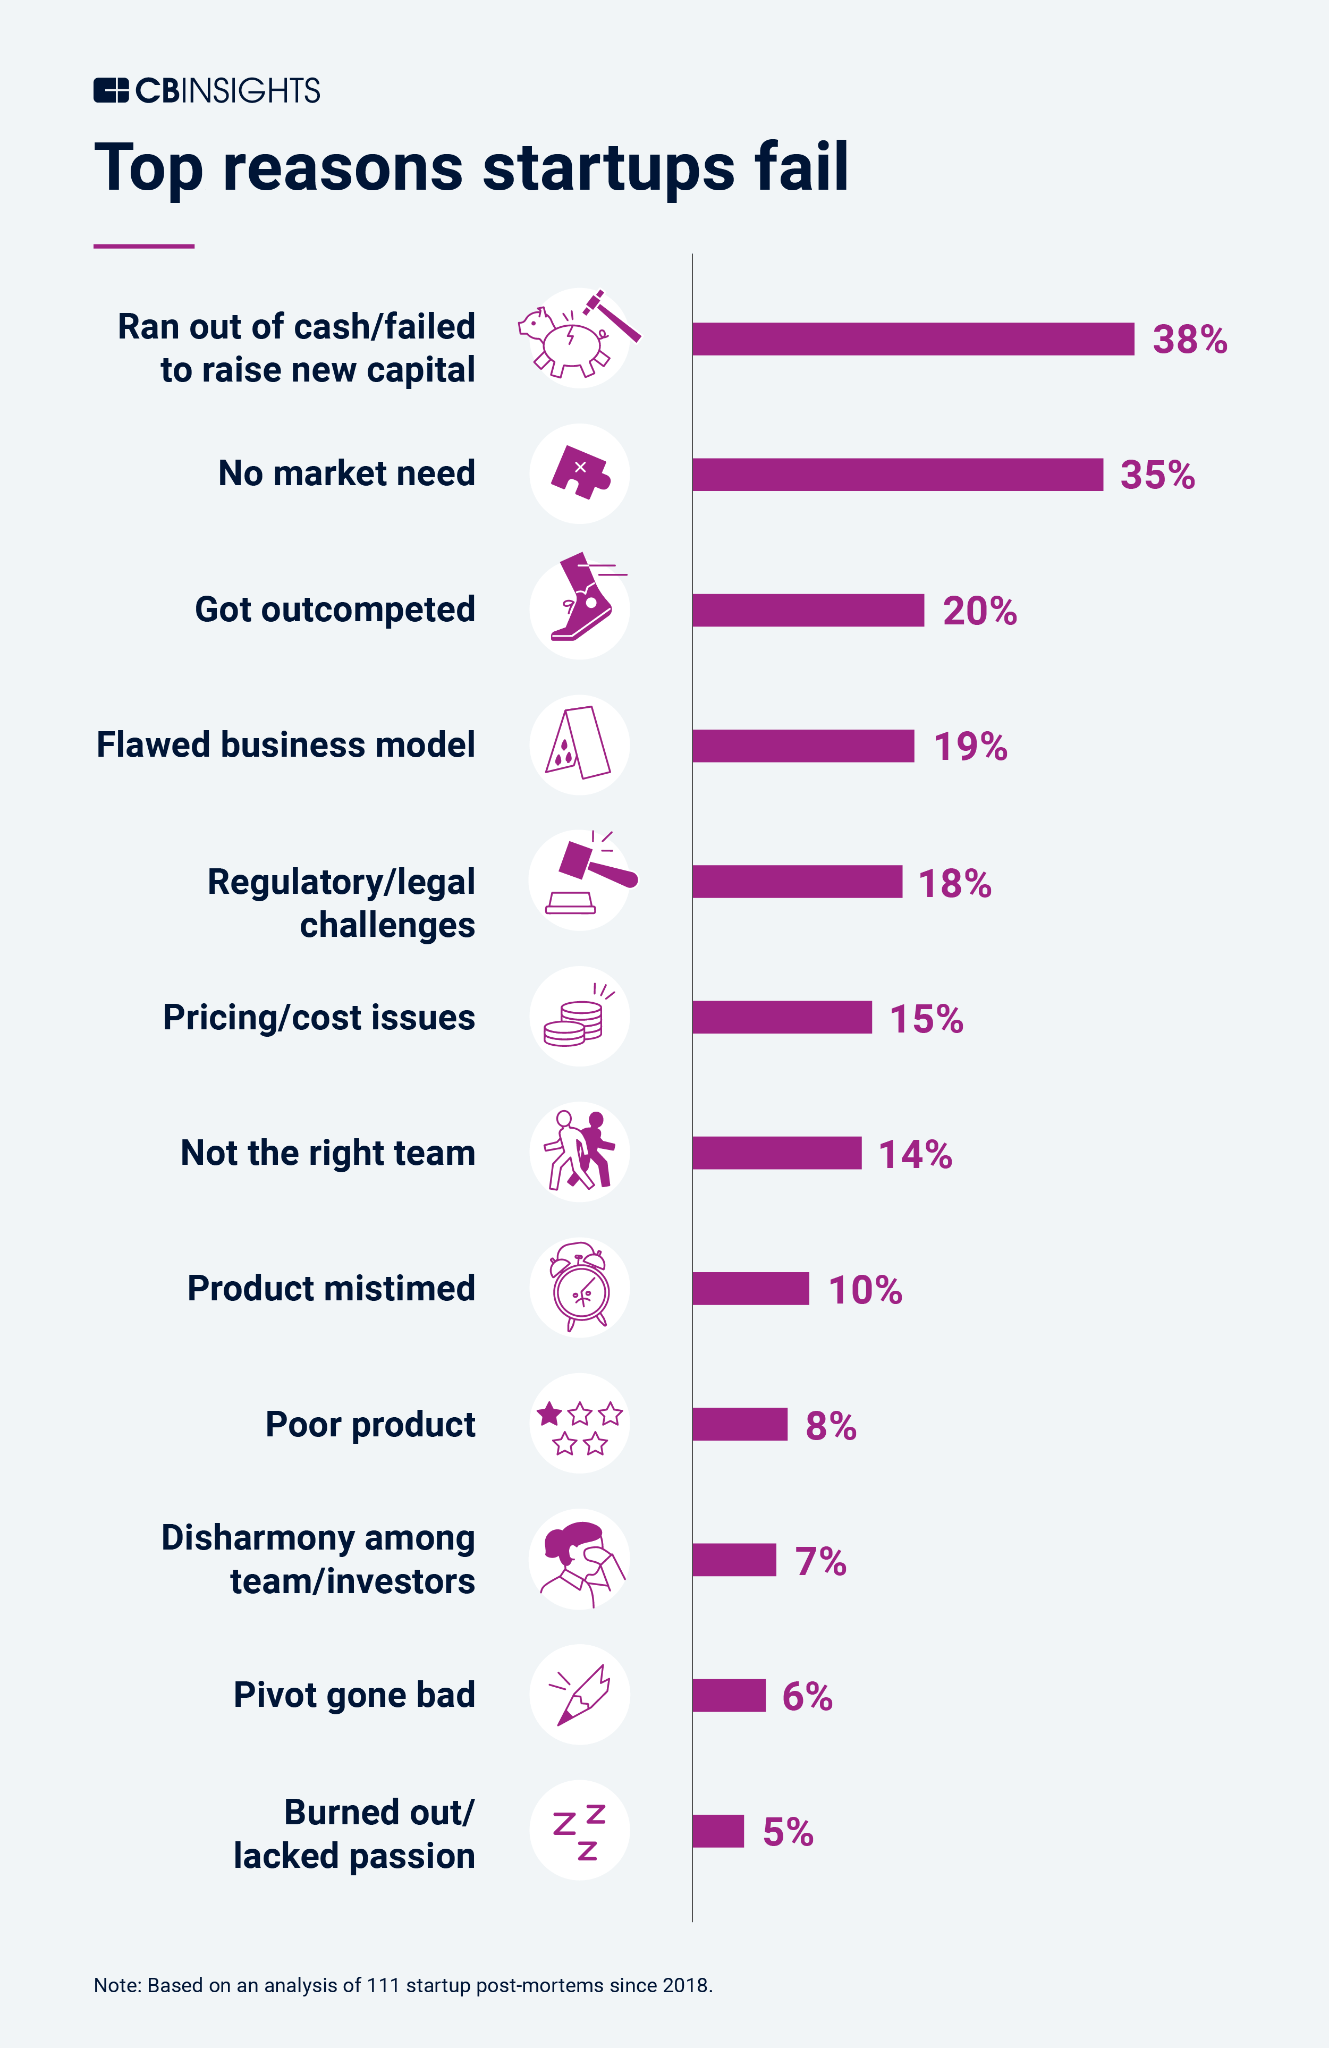 HAD: Infographic on reasons for startup failures